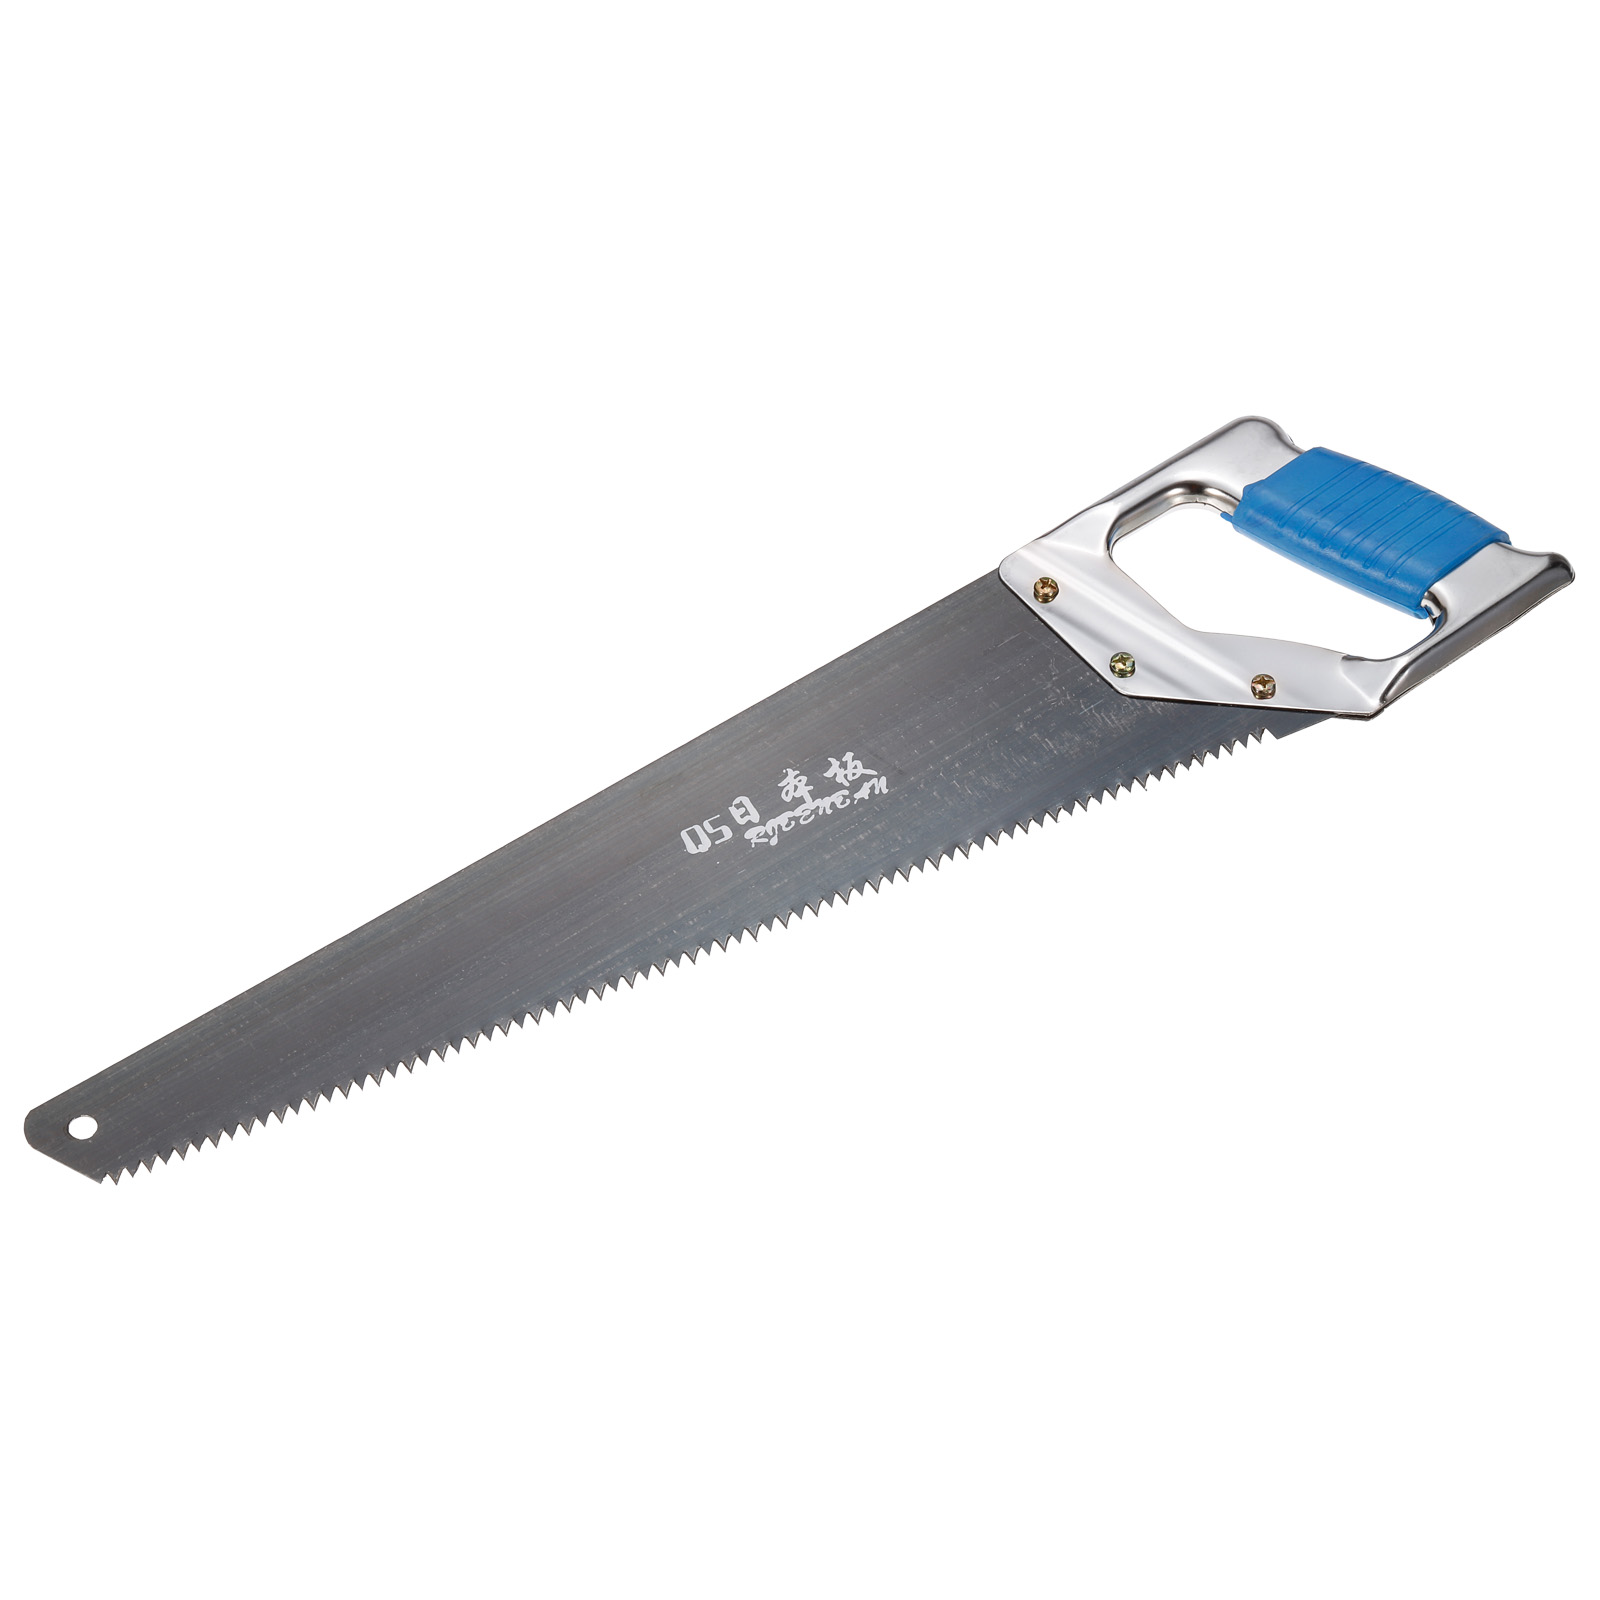 MMI-LX Cutter avec Annulaire Shank 15-18mm x 50 mm Scie for